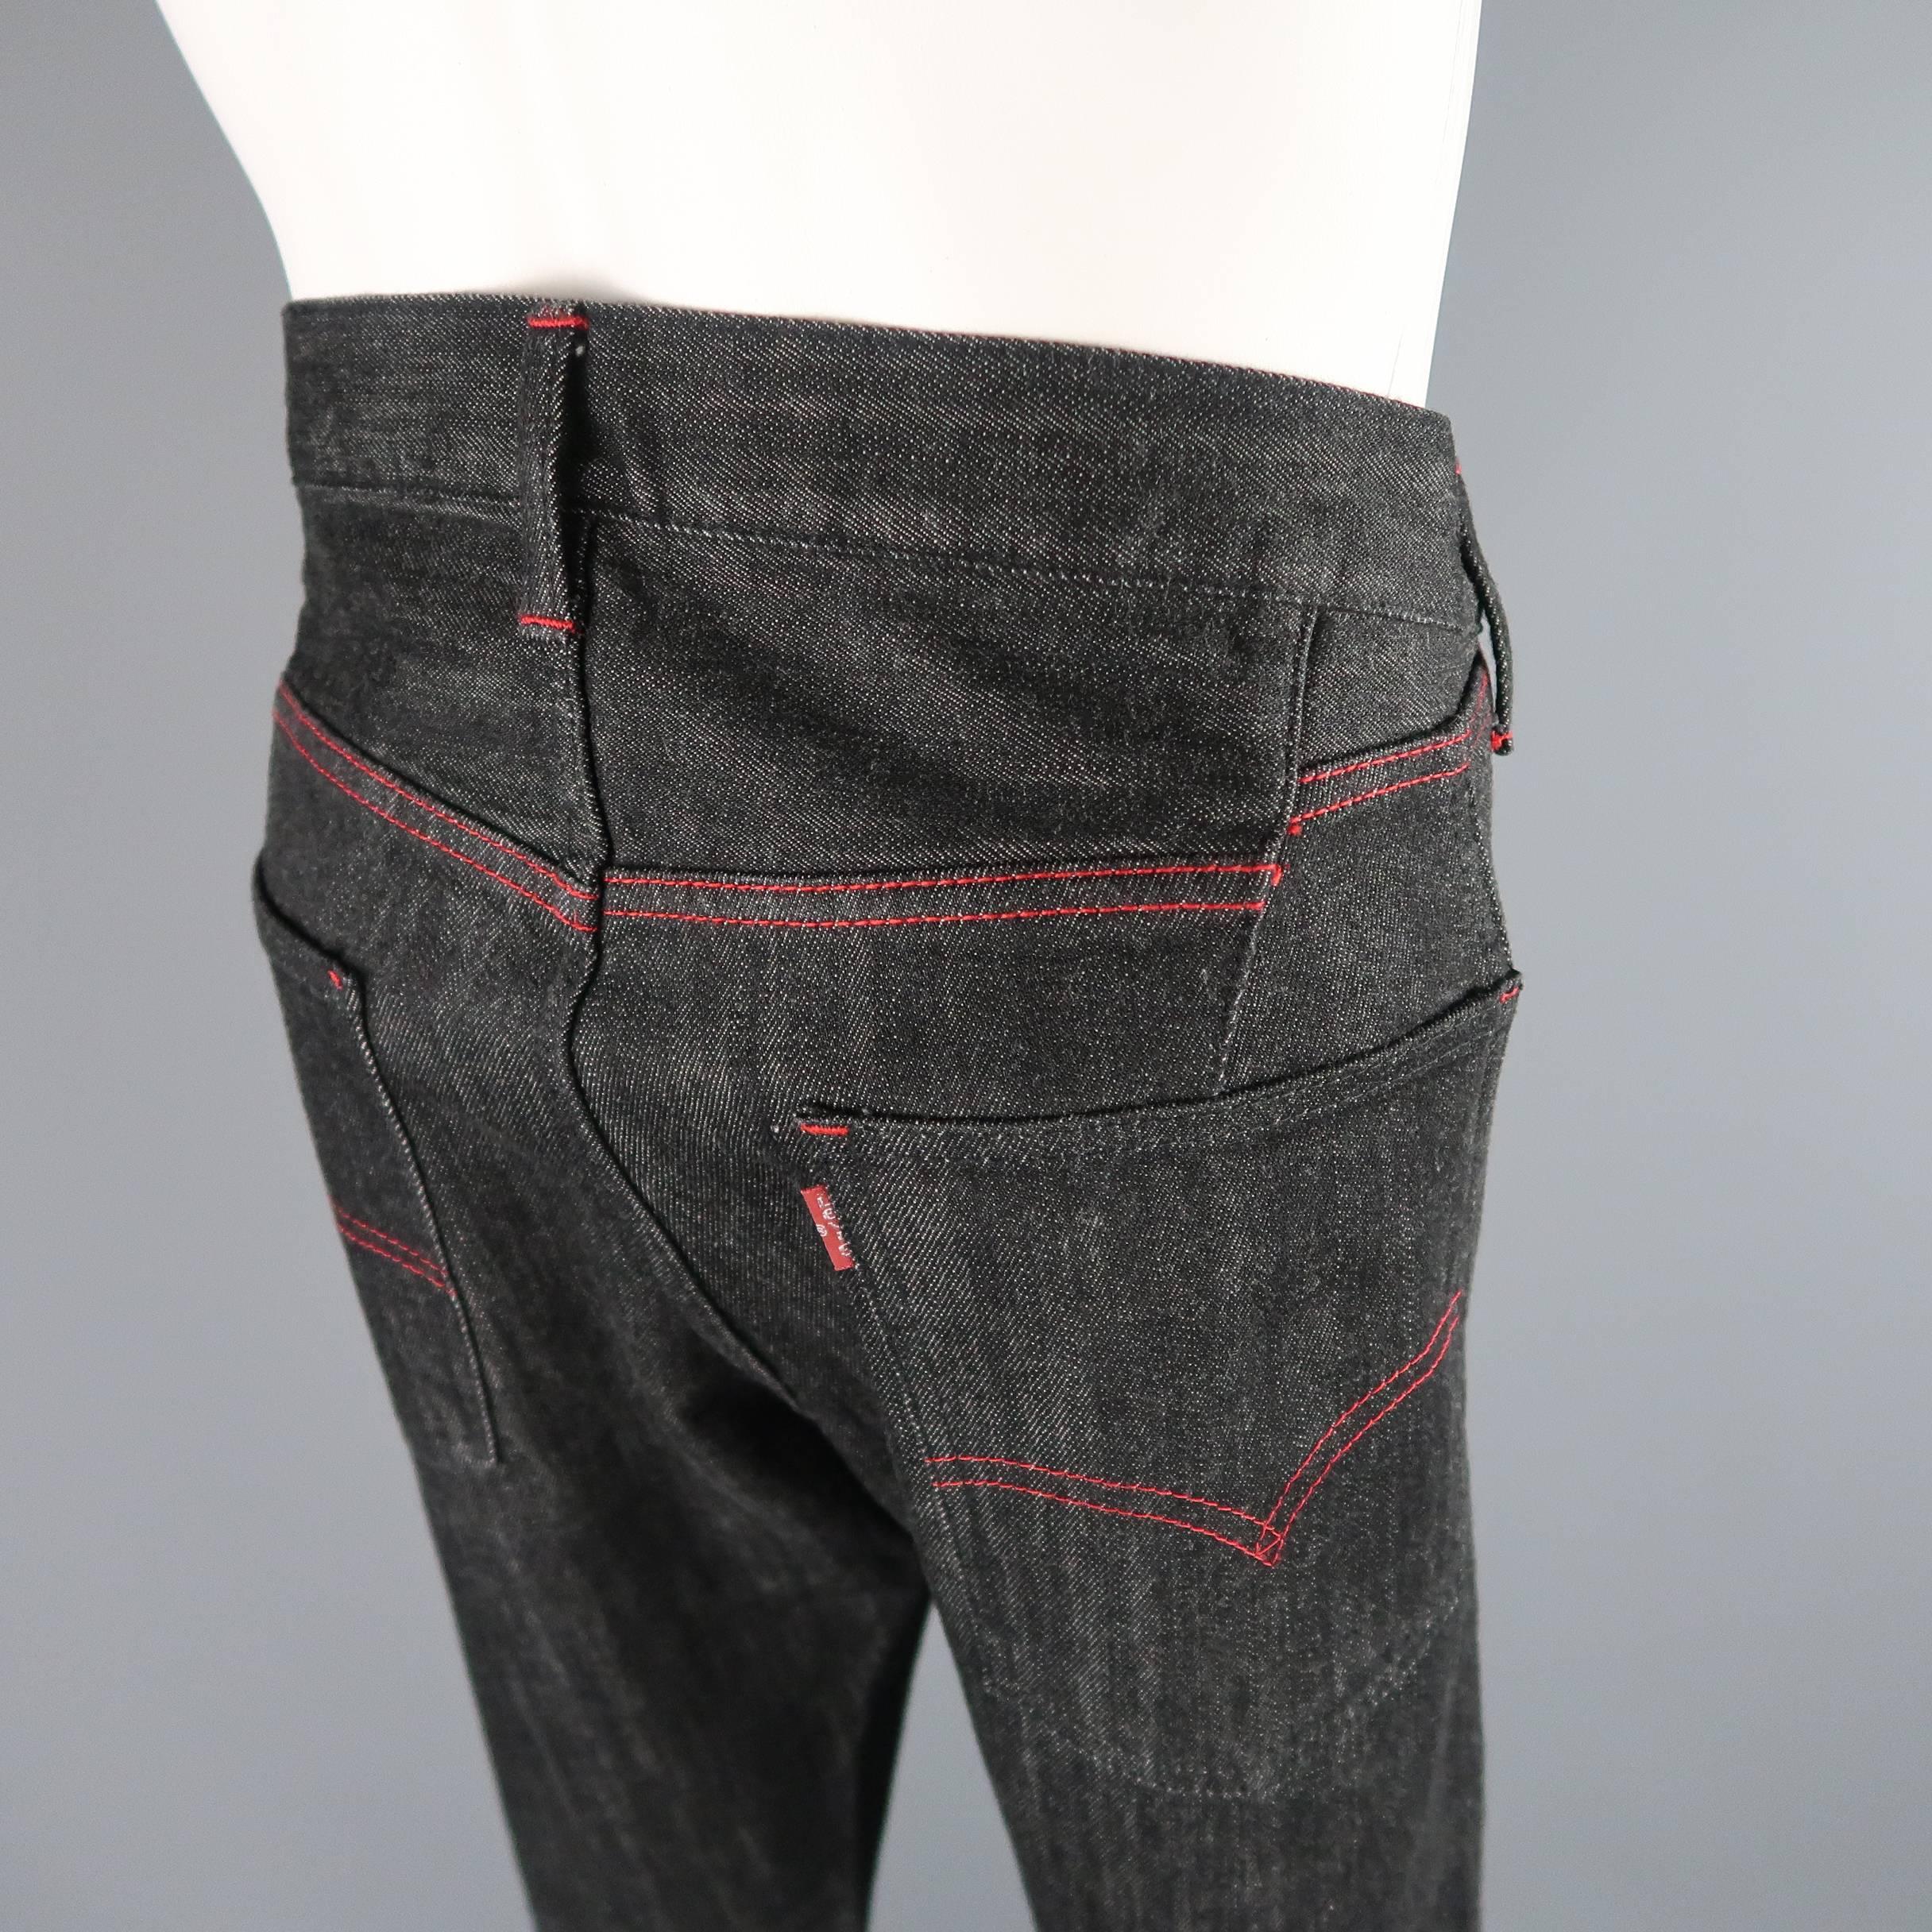 black jeans with red stitching